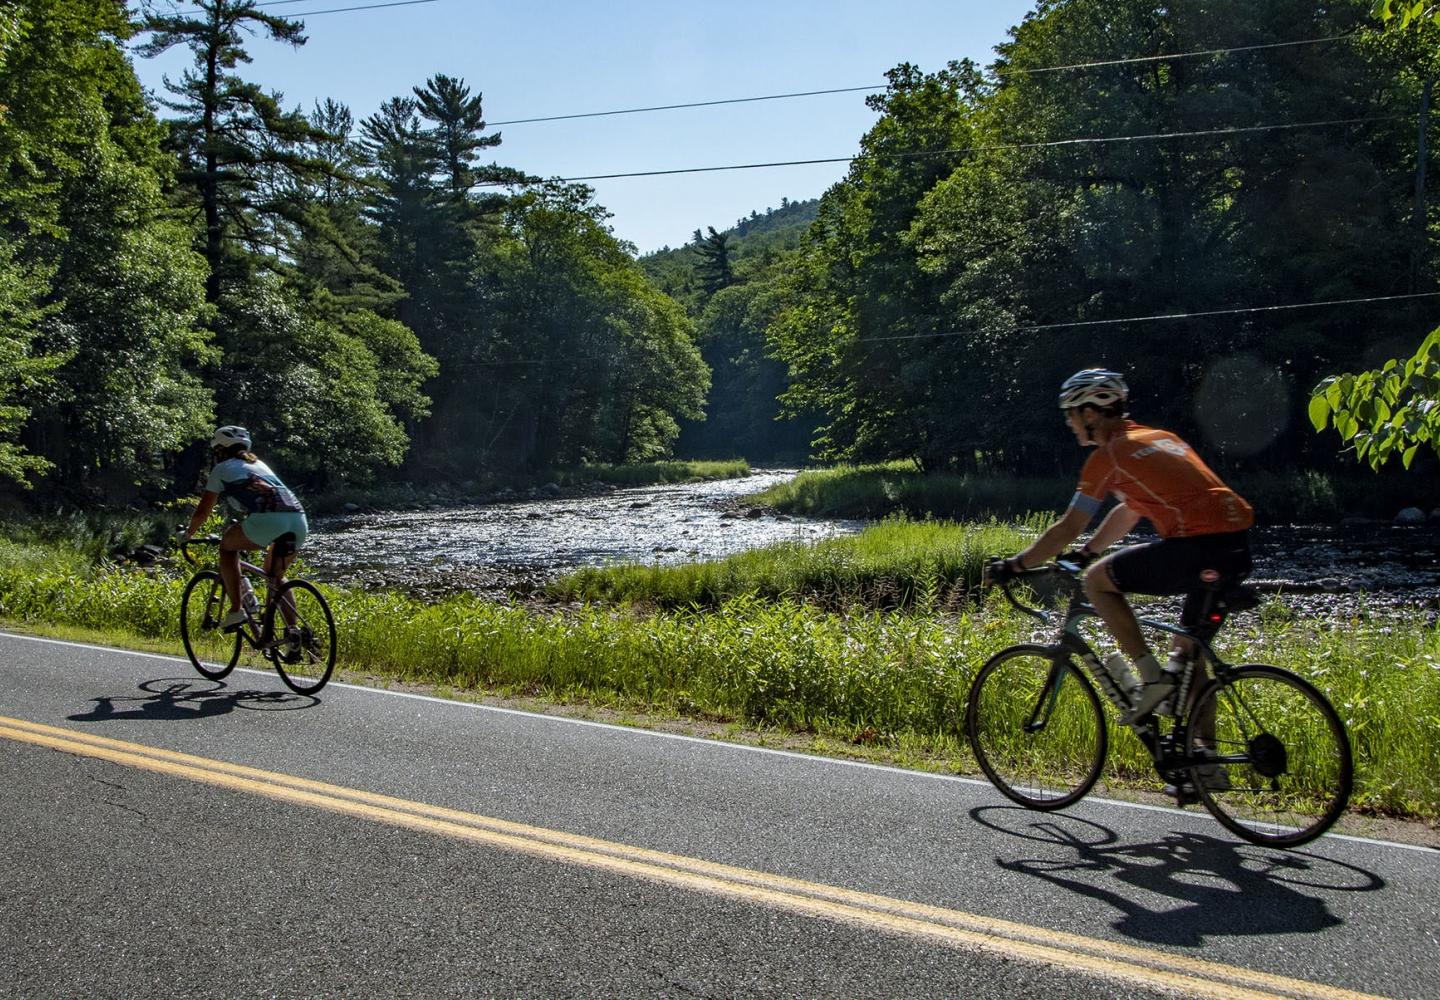 Riders cruise along the Ausable River outside of Wilmington on a quite backroad heading towards Clayburg.